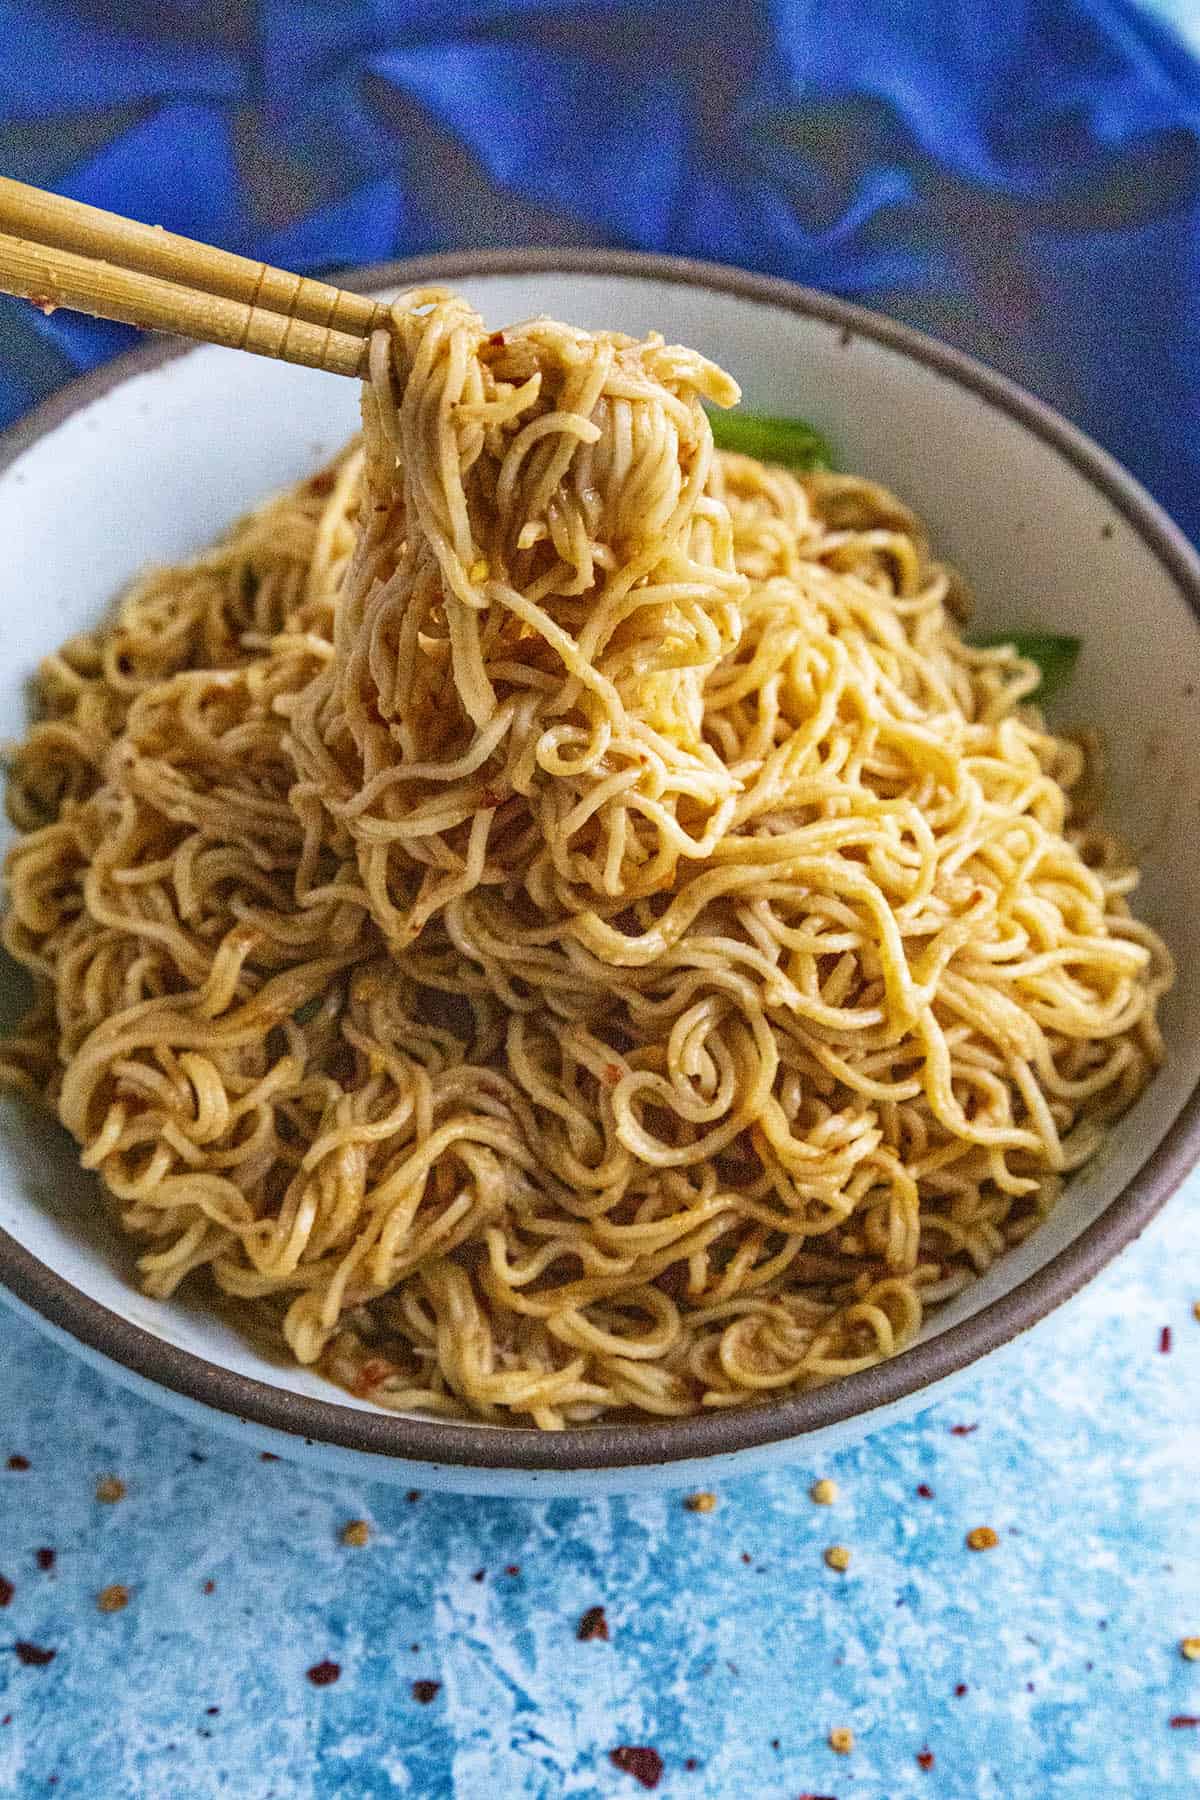 A large scoop of Thai Peanut Noodles, ready to eat